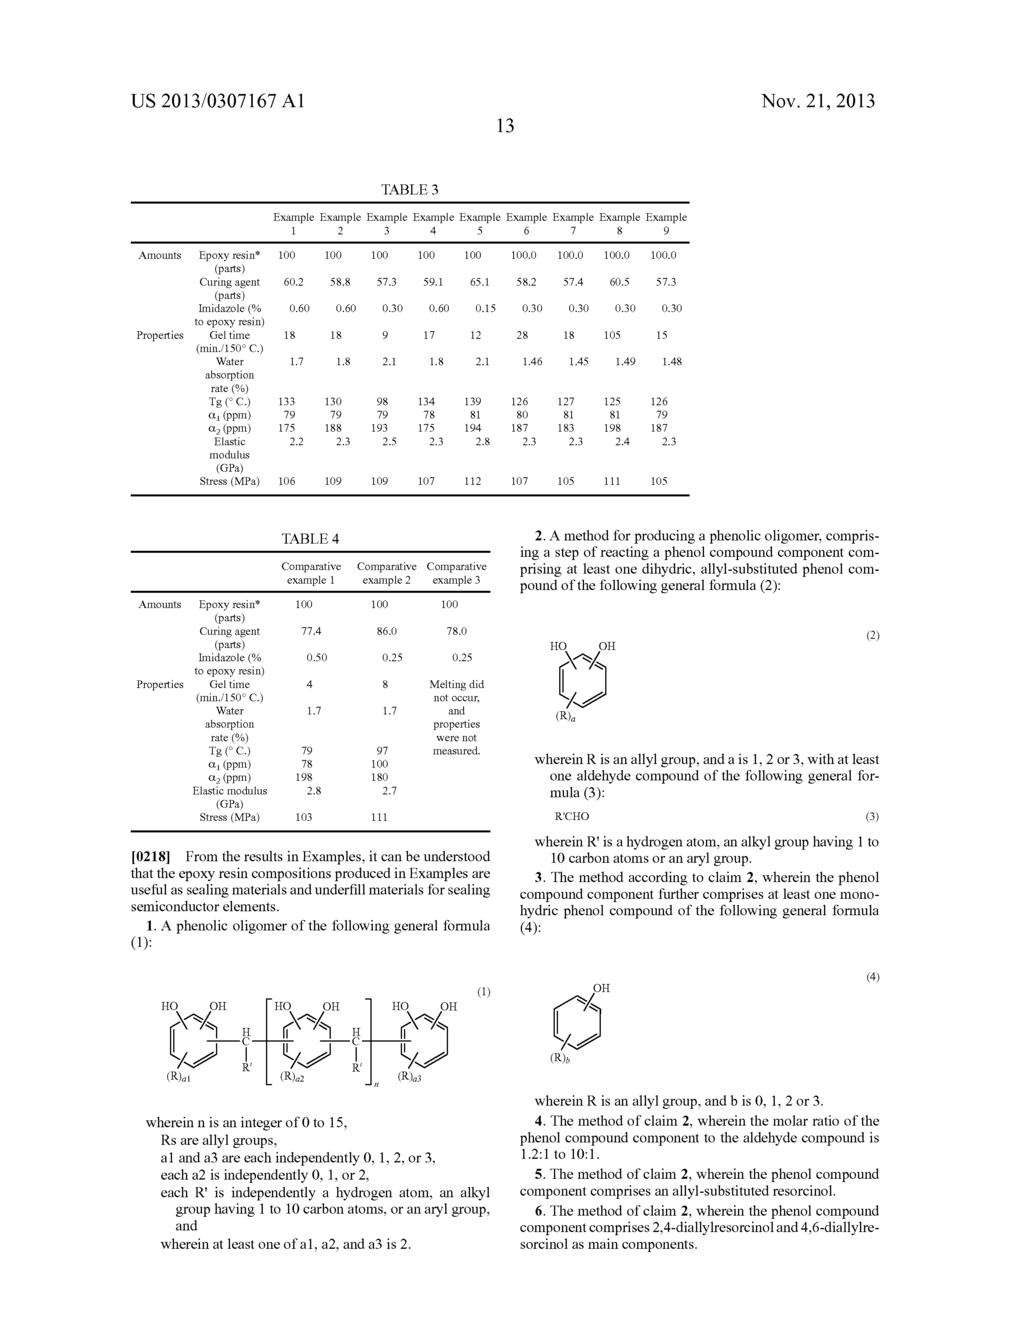 PHENOLIC OLIGOMER AND METHOD FOR PRODUCING THE SAME - diagram, schematic, and image 20